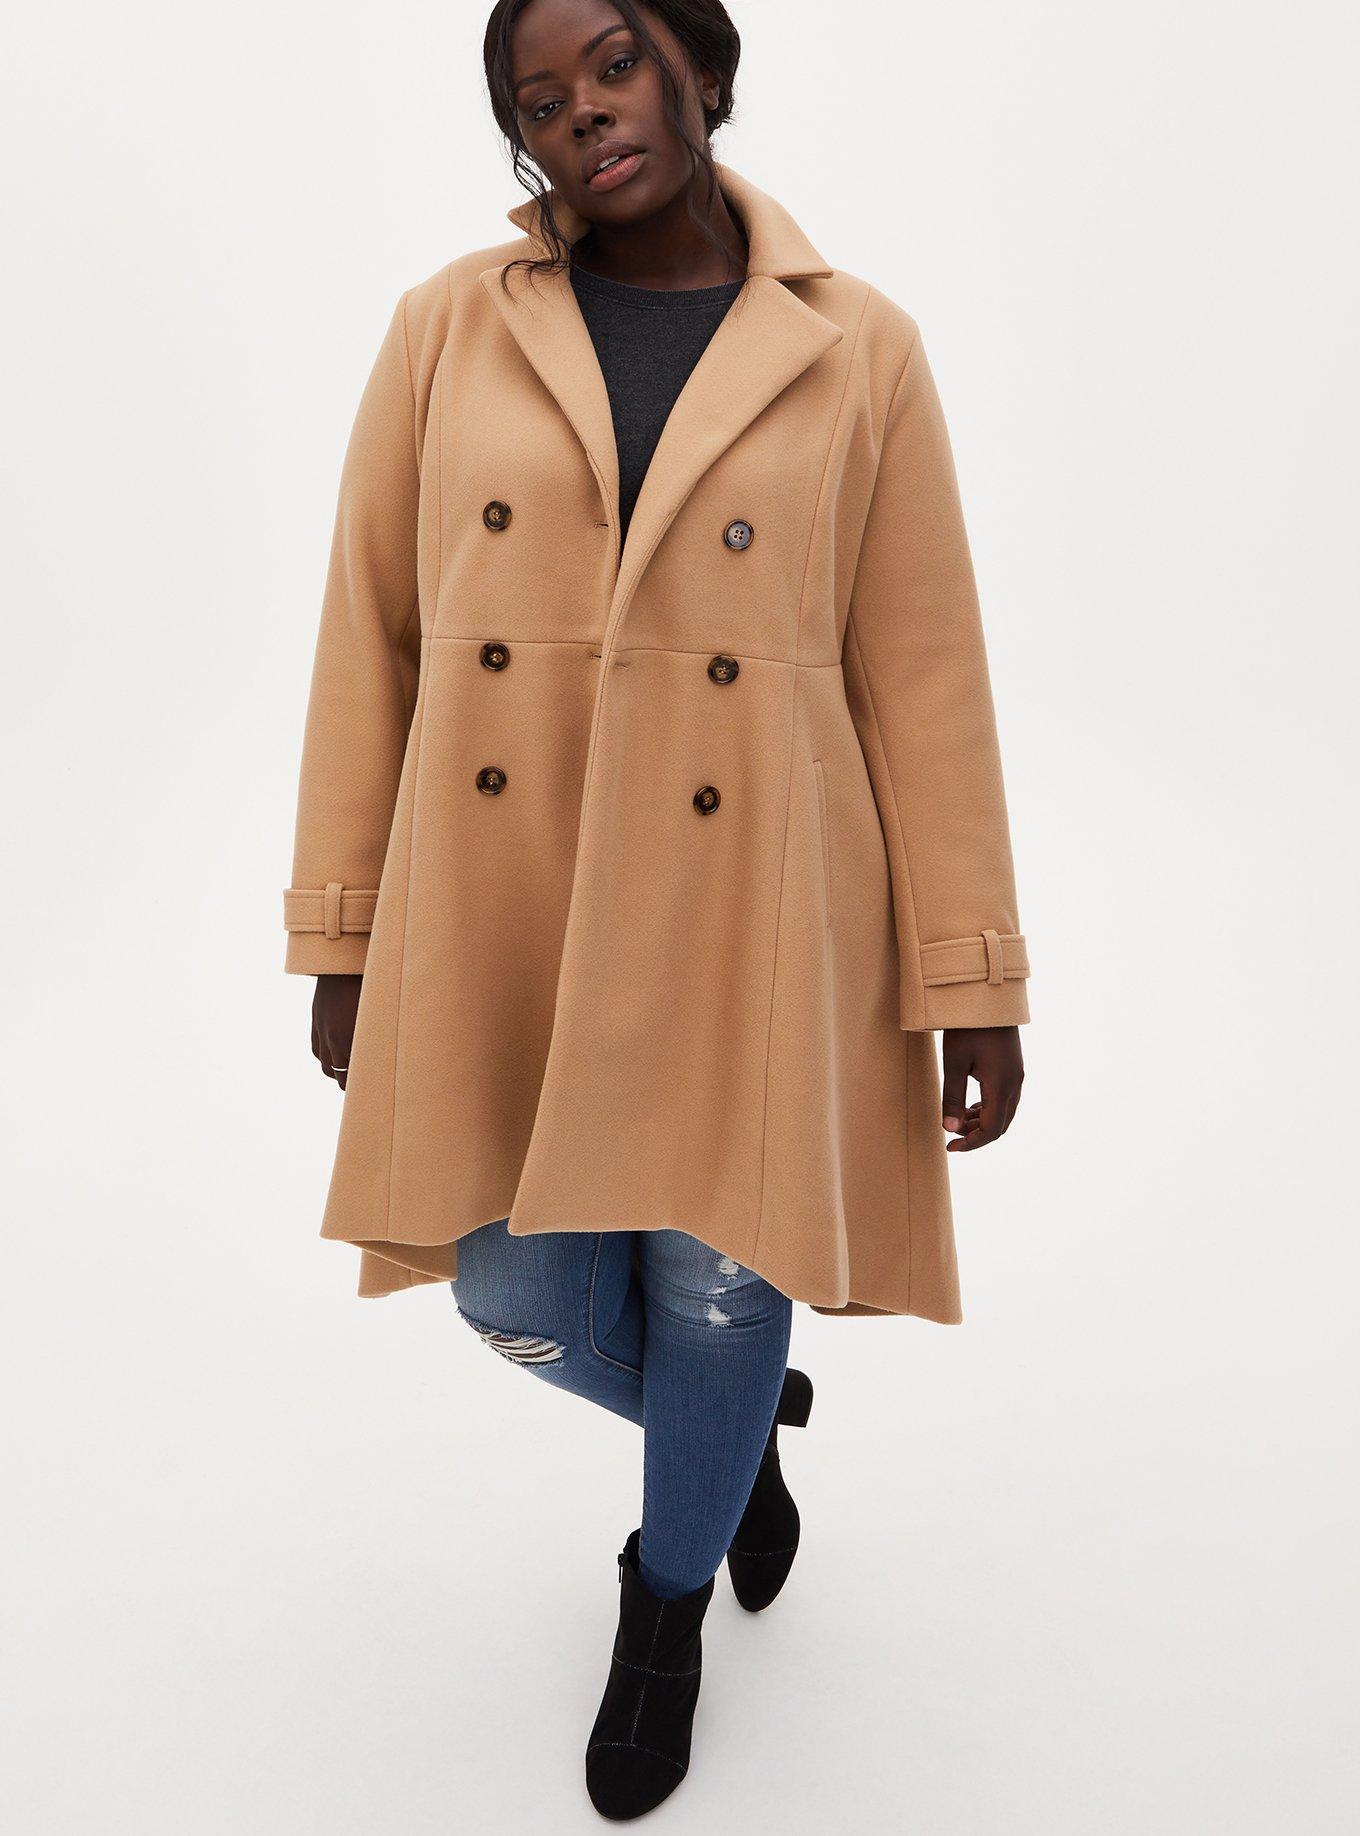 Plus Size - Double Breasted Coat - Torrid